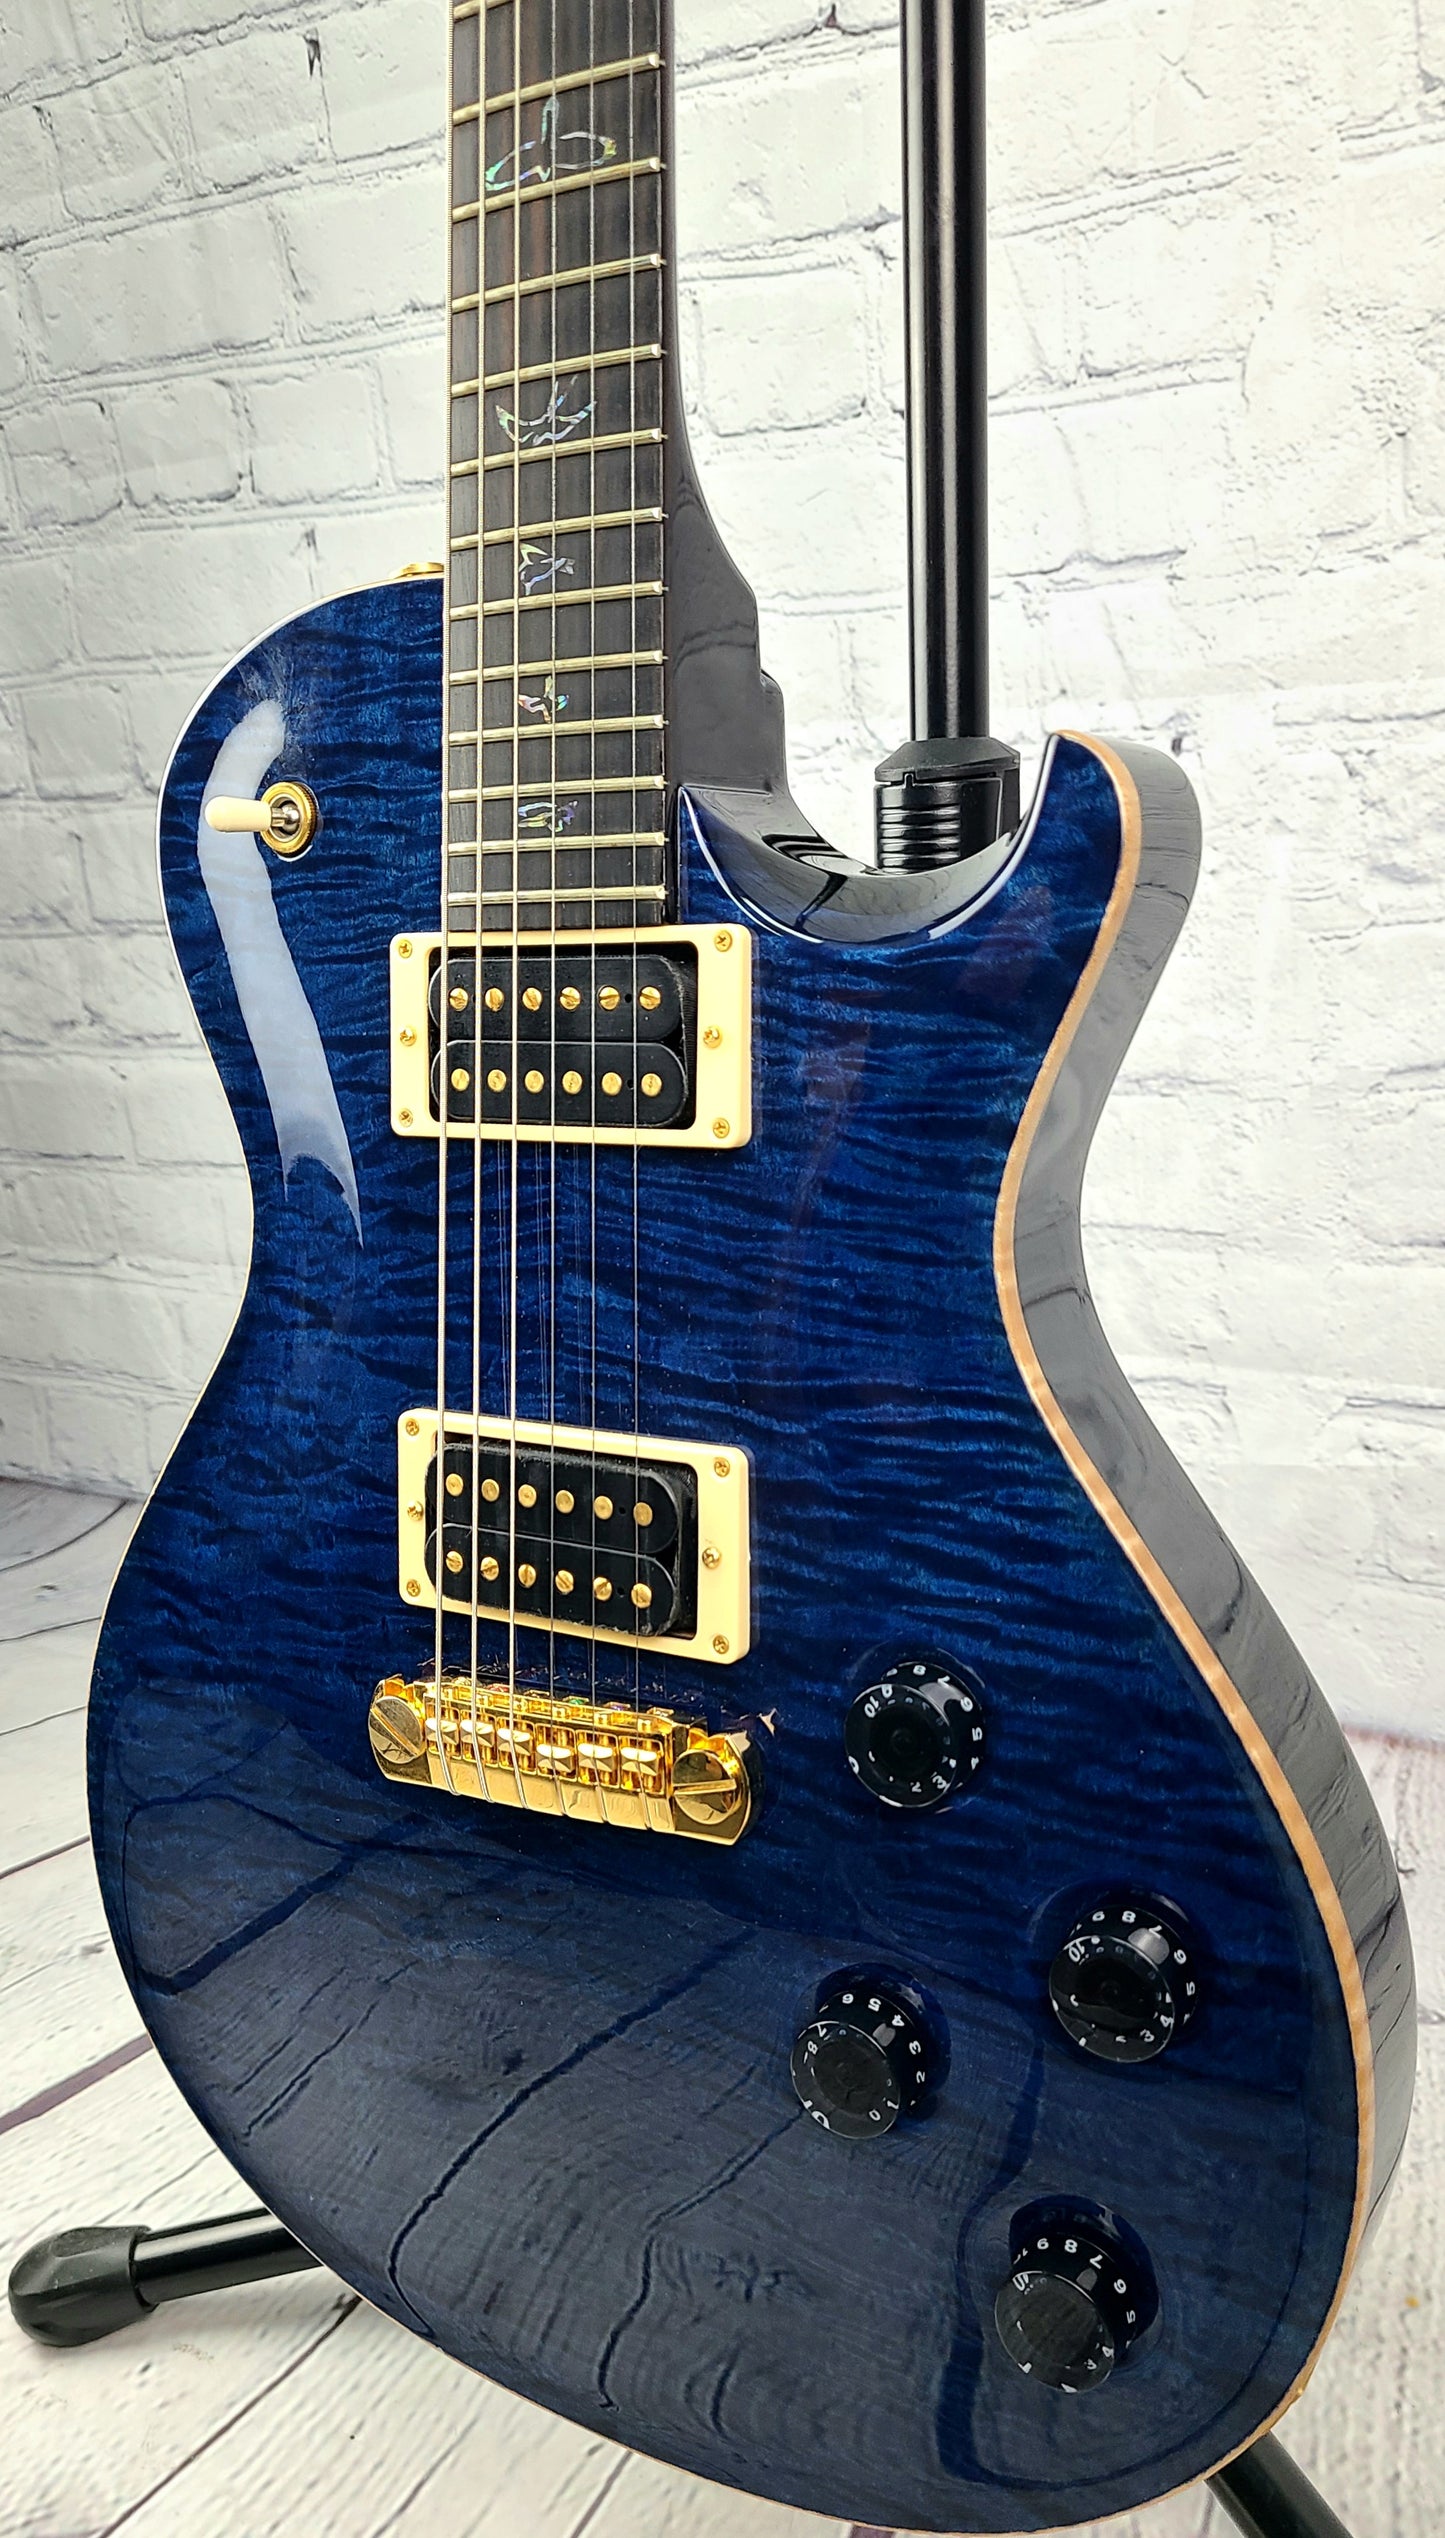 USED 2008 PRS SC250 Singlecut Artist Package Whale Blue Gold Hardware